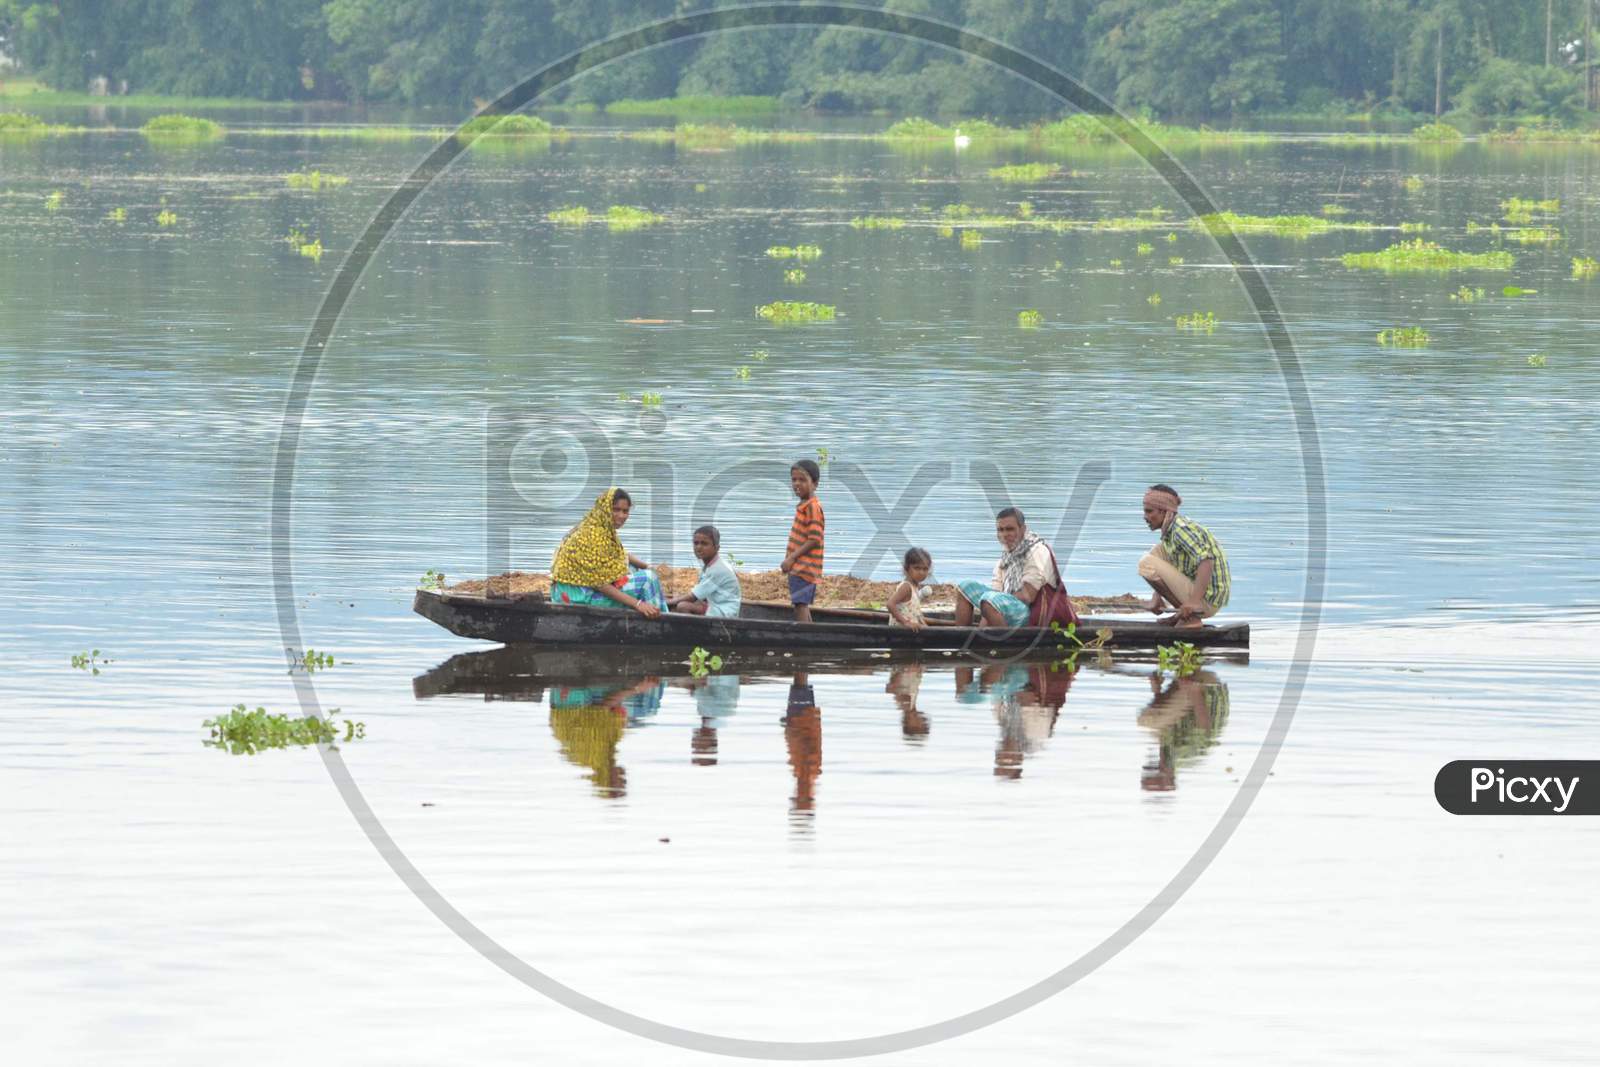 Villagers Uses A bamboo Raft T Near Submerged Houses In A Village Near Kaziranga National Park In Golaghat District Of Assam On July 26,2016